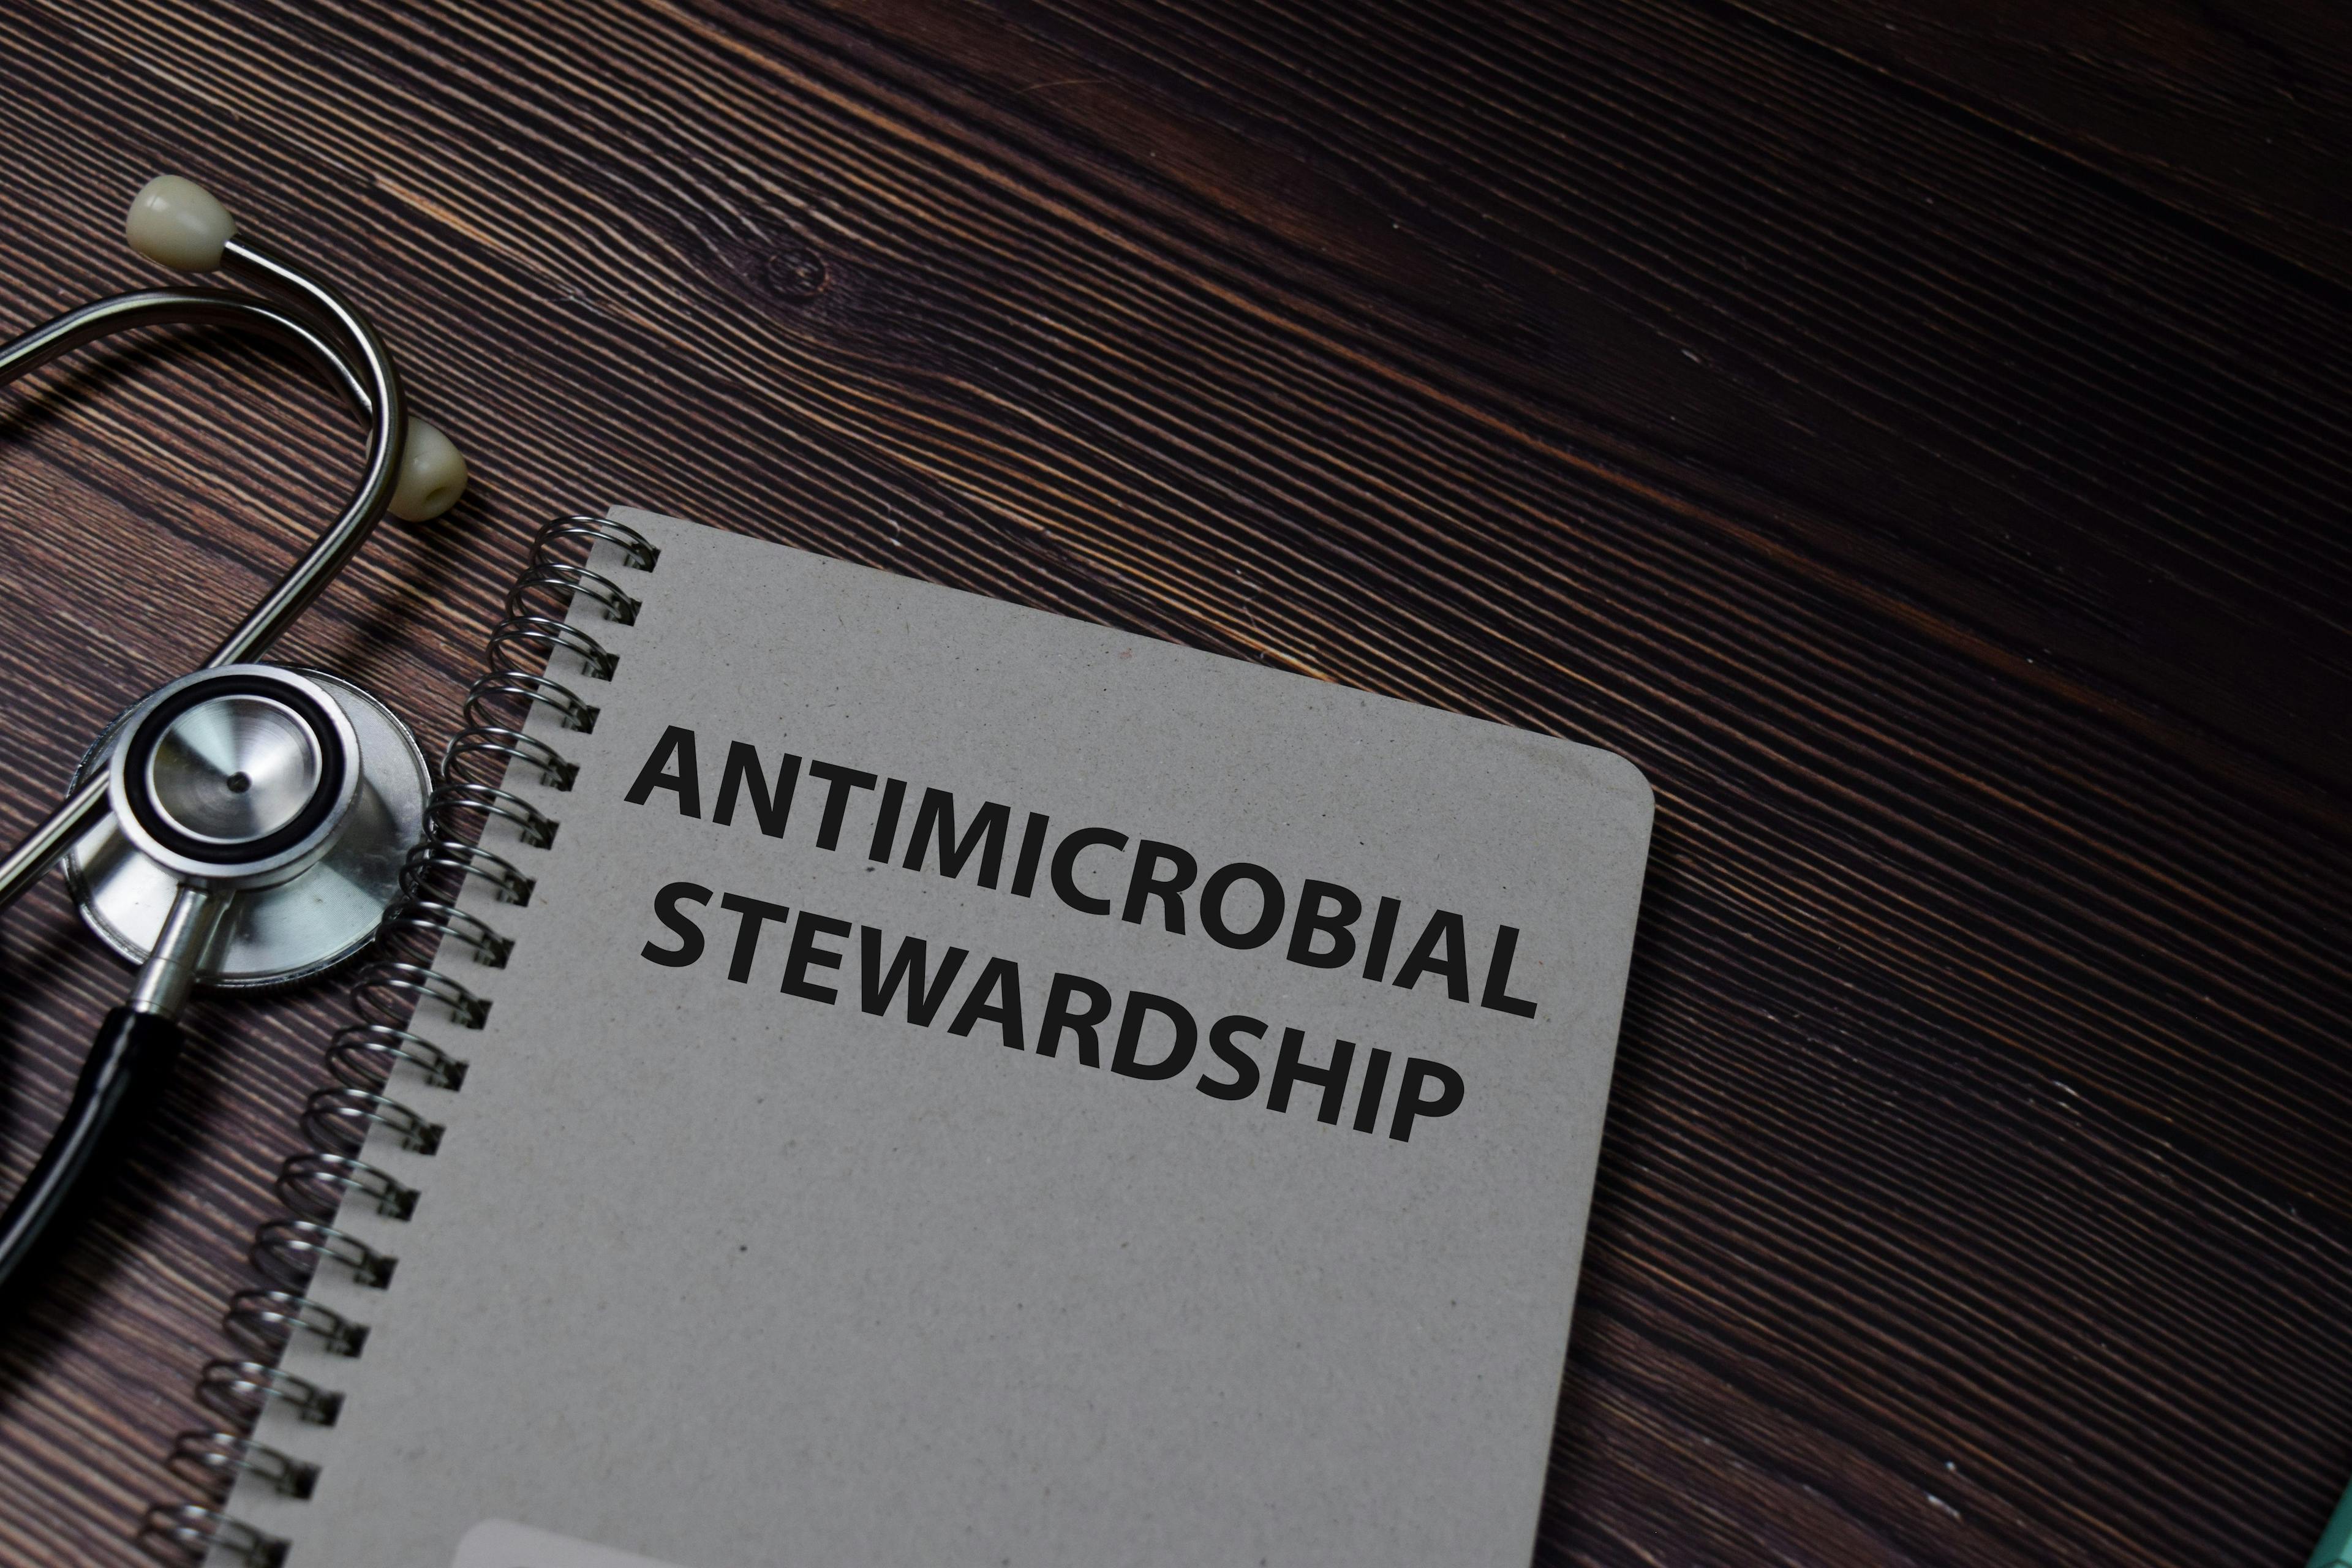 Antimicrobial Stewardship Programs Can Reduce Consumption